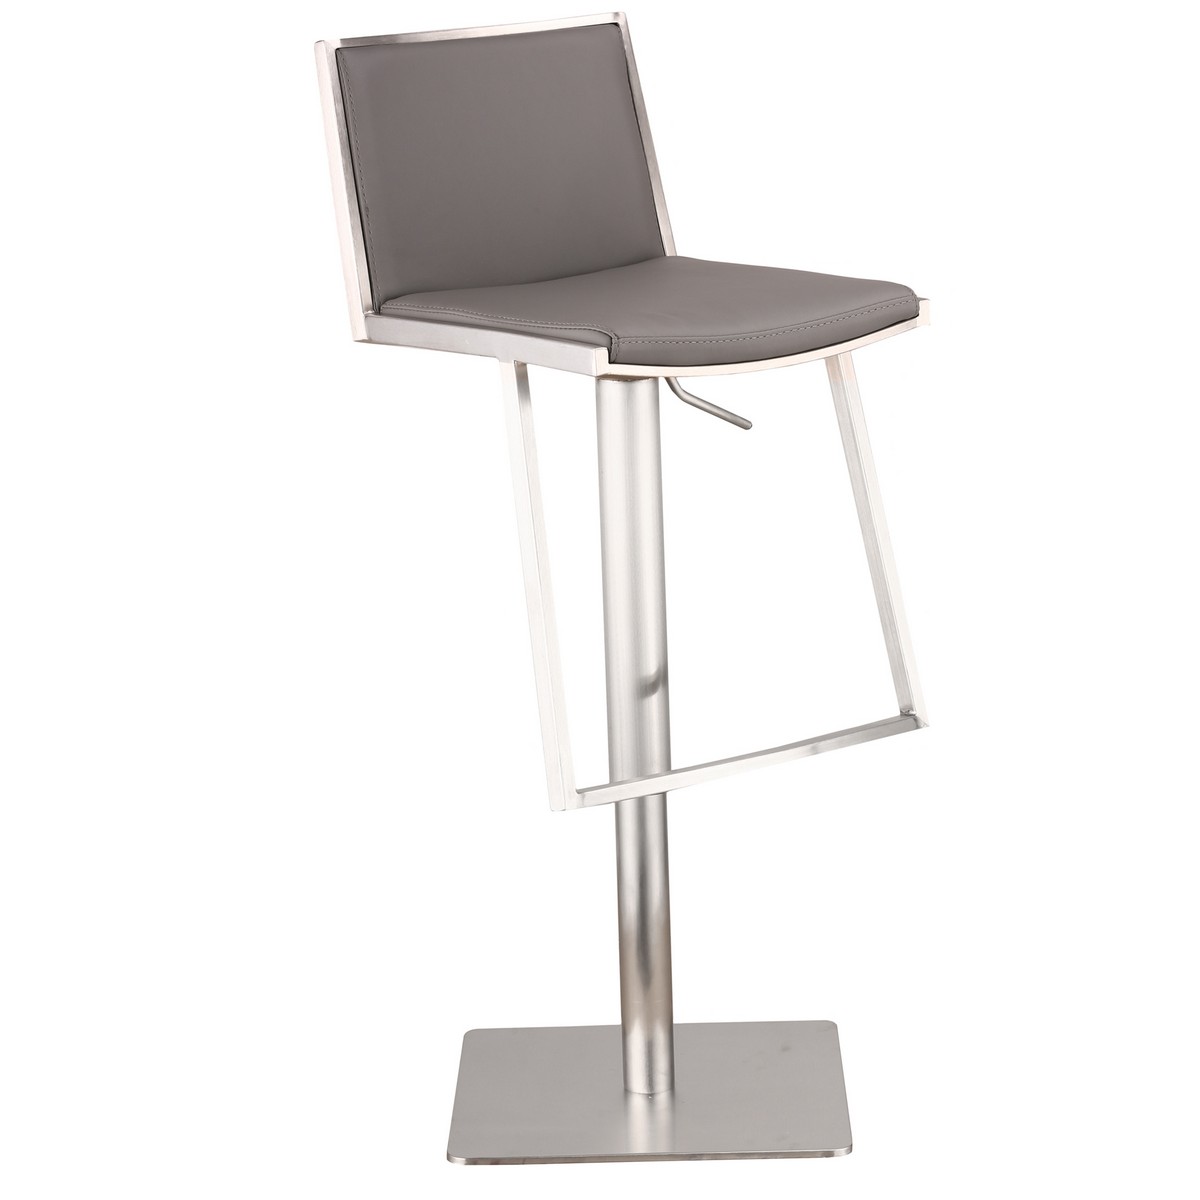 Armen Living Ibiza Adjustable Brushed Stainless Steel Barstool in Gray Leatherette